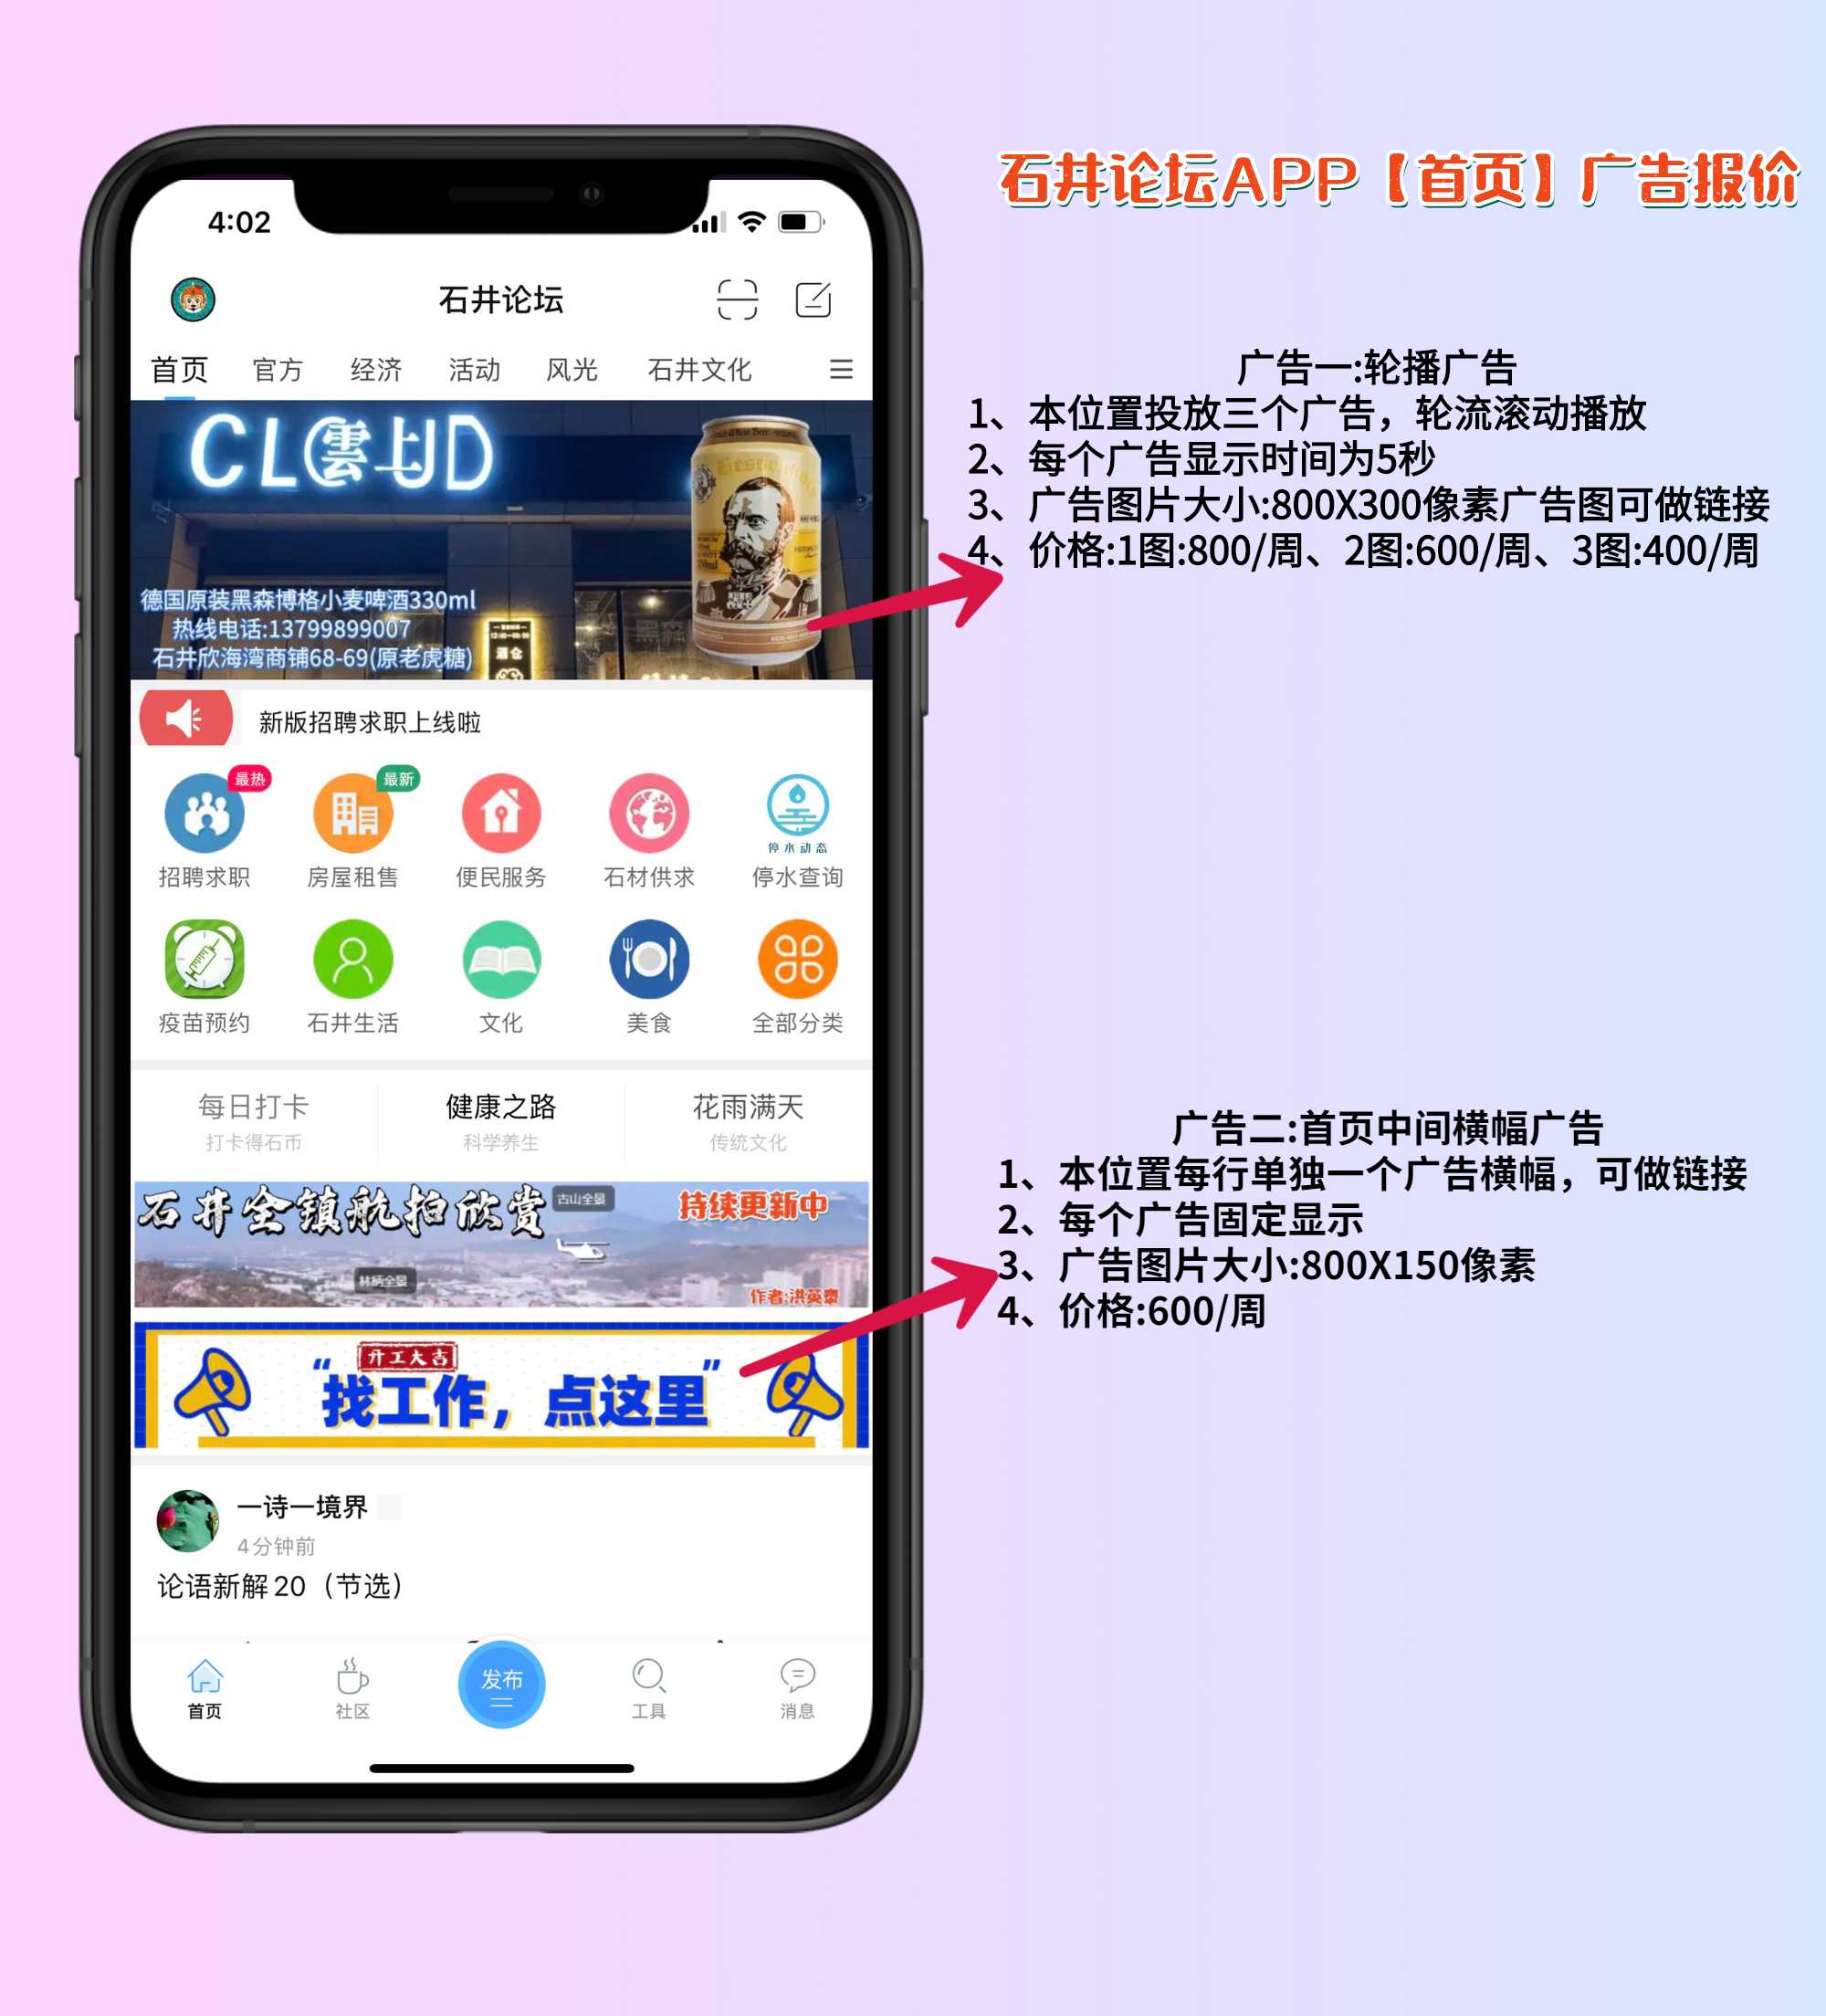 APP首页广告报价.png